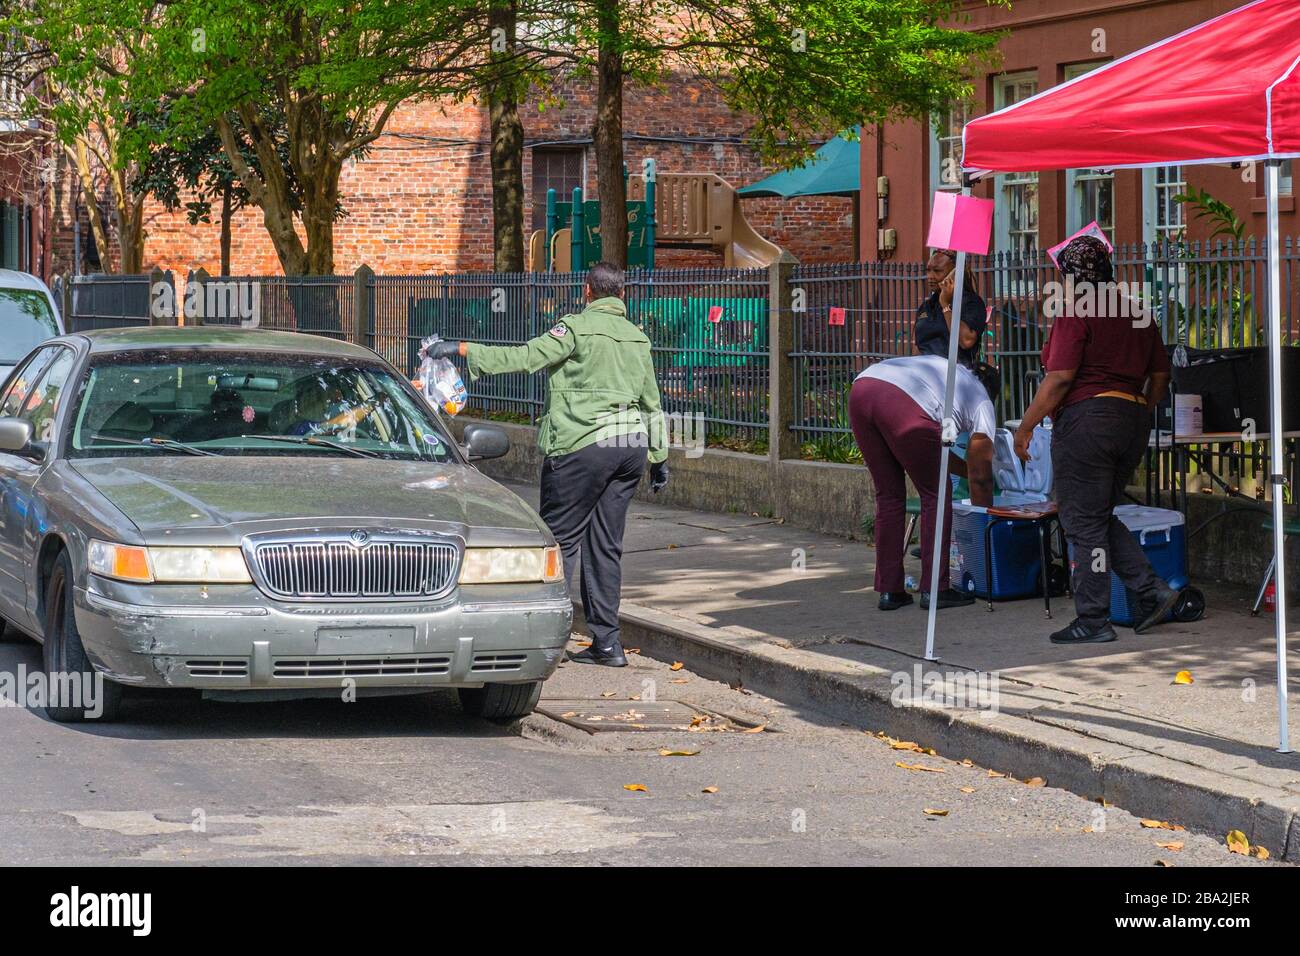 New Orleans, LA/USA - 3/21/2020: Volunteers Distributing Free Meals to Parents of School Children Forced to Stay Home Due to Covid-19 Pandemic Stock Photo